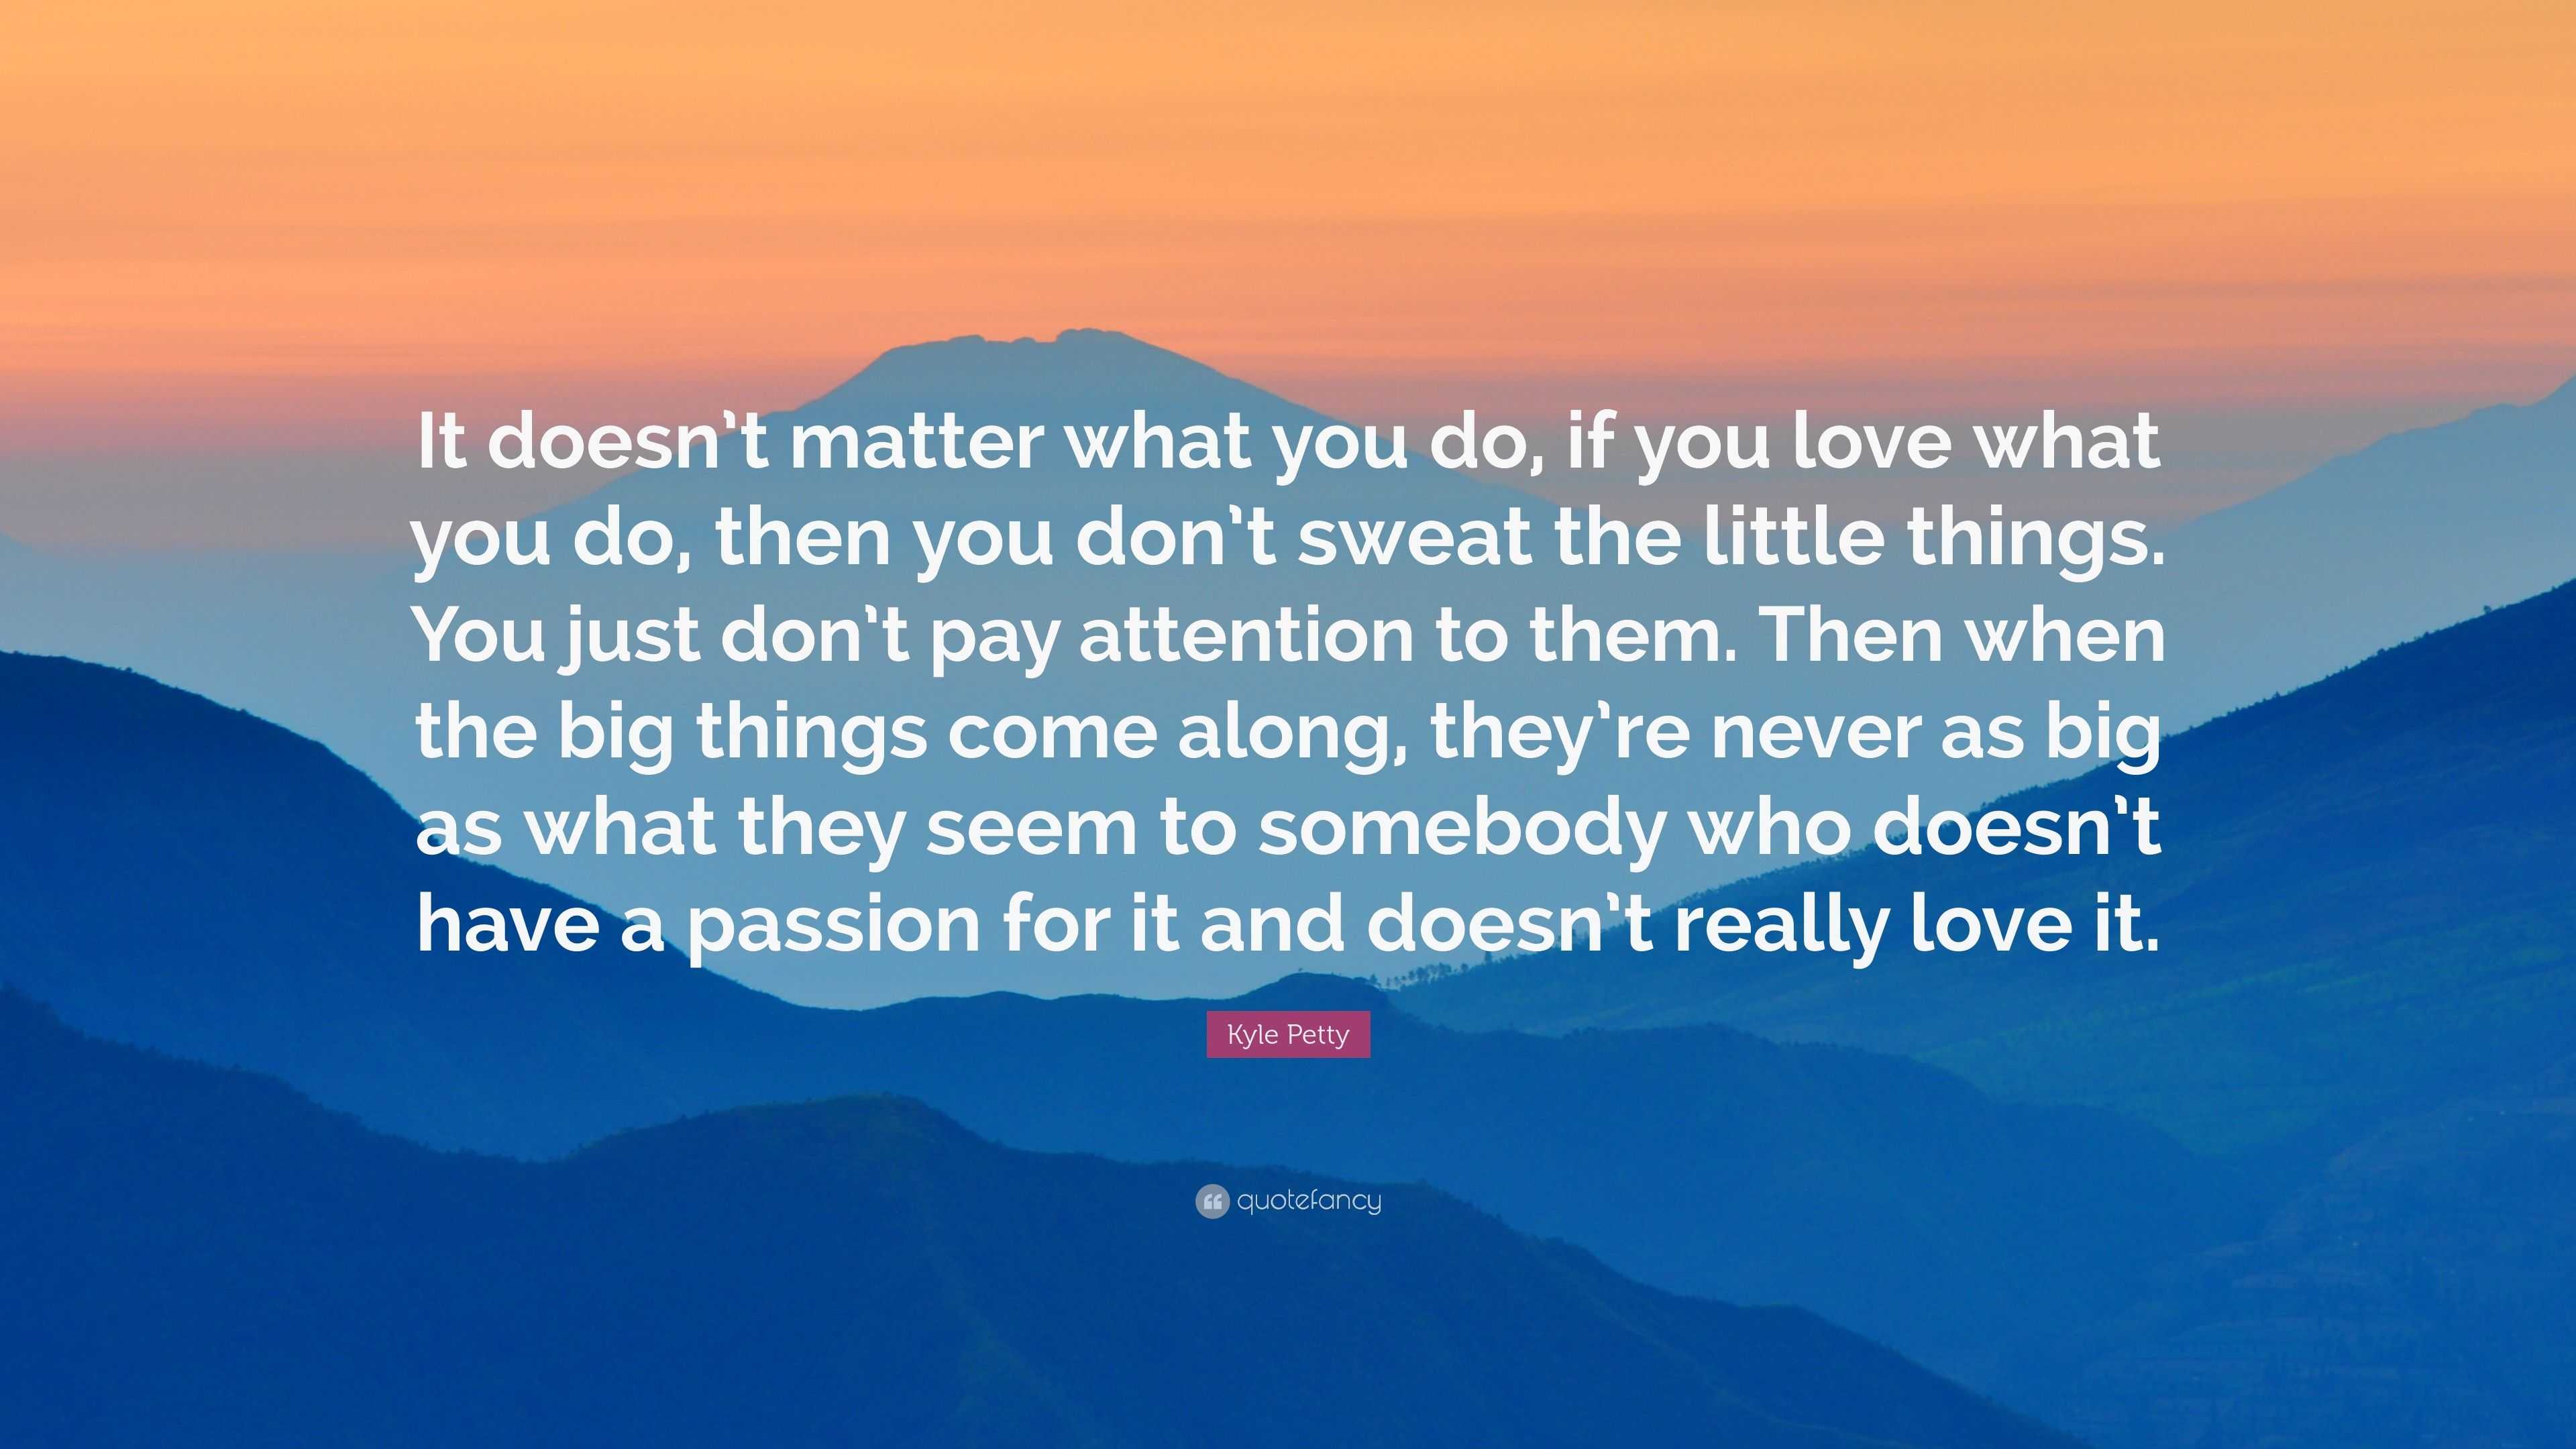 Kyle Petty Quote: “It doesn't matter what you do, if you love what